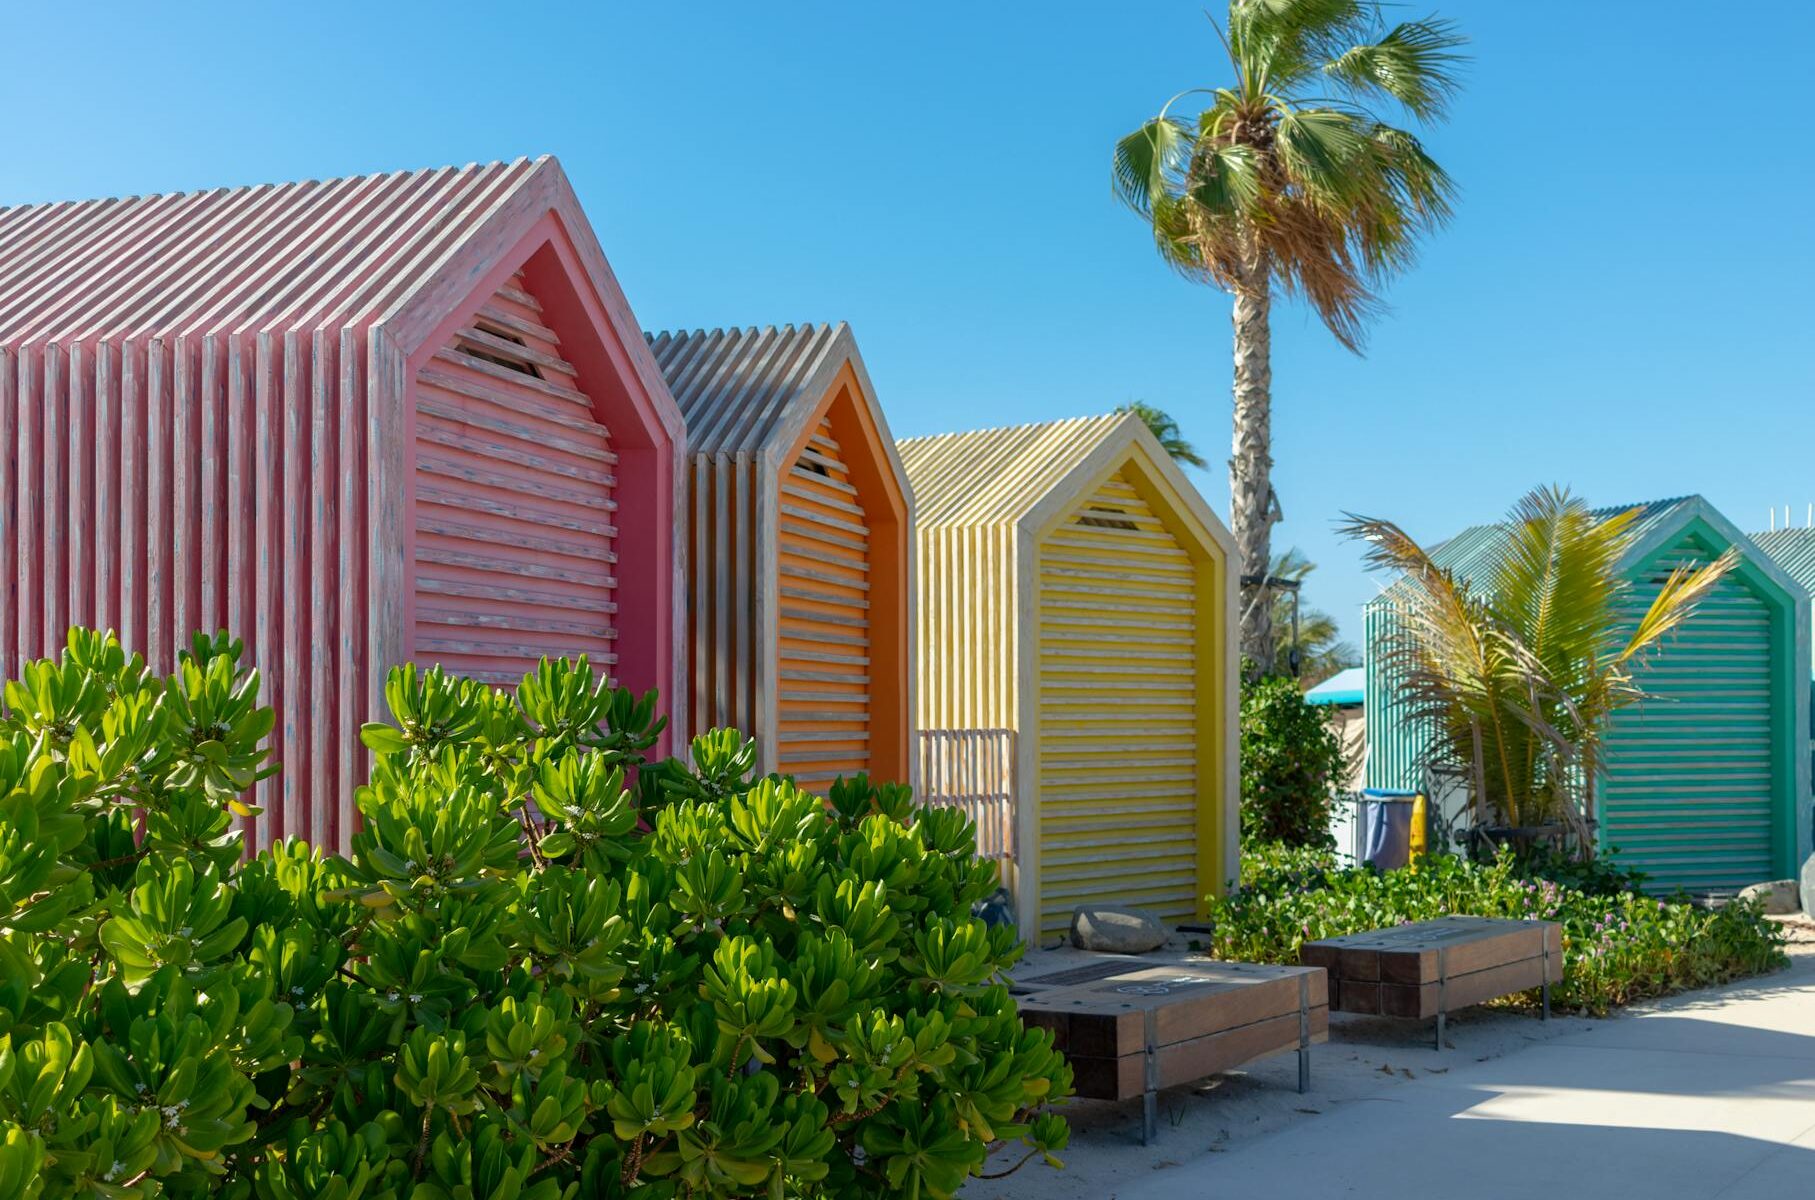 colorful beach huts near green trees under blue sky